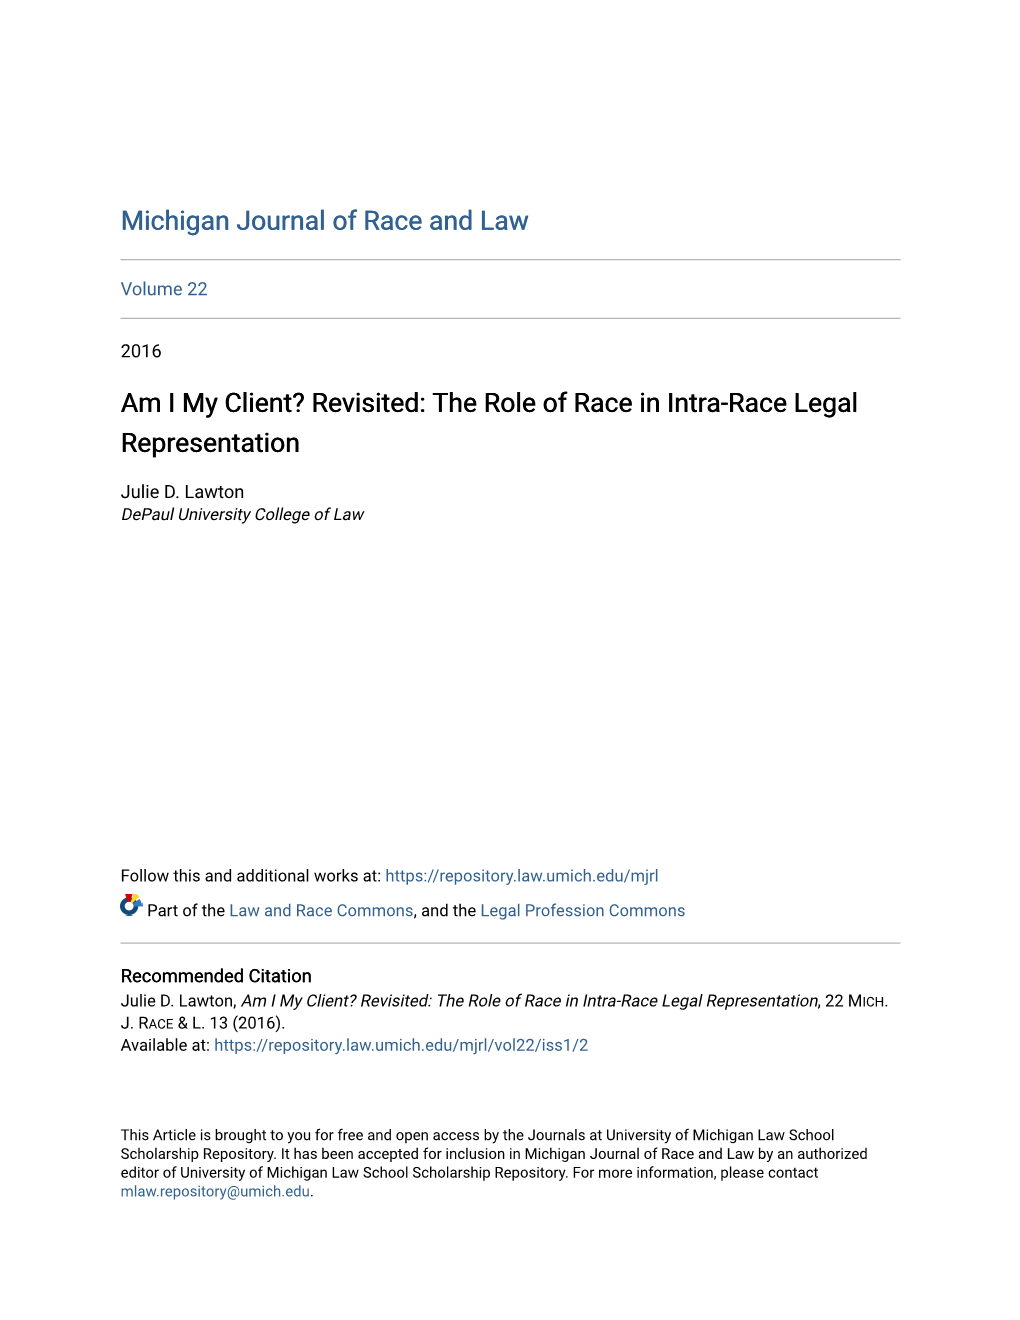 Revisited: the Role of Race in Intra-Race Legal Representation